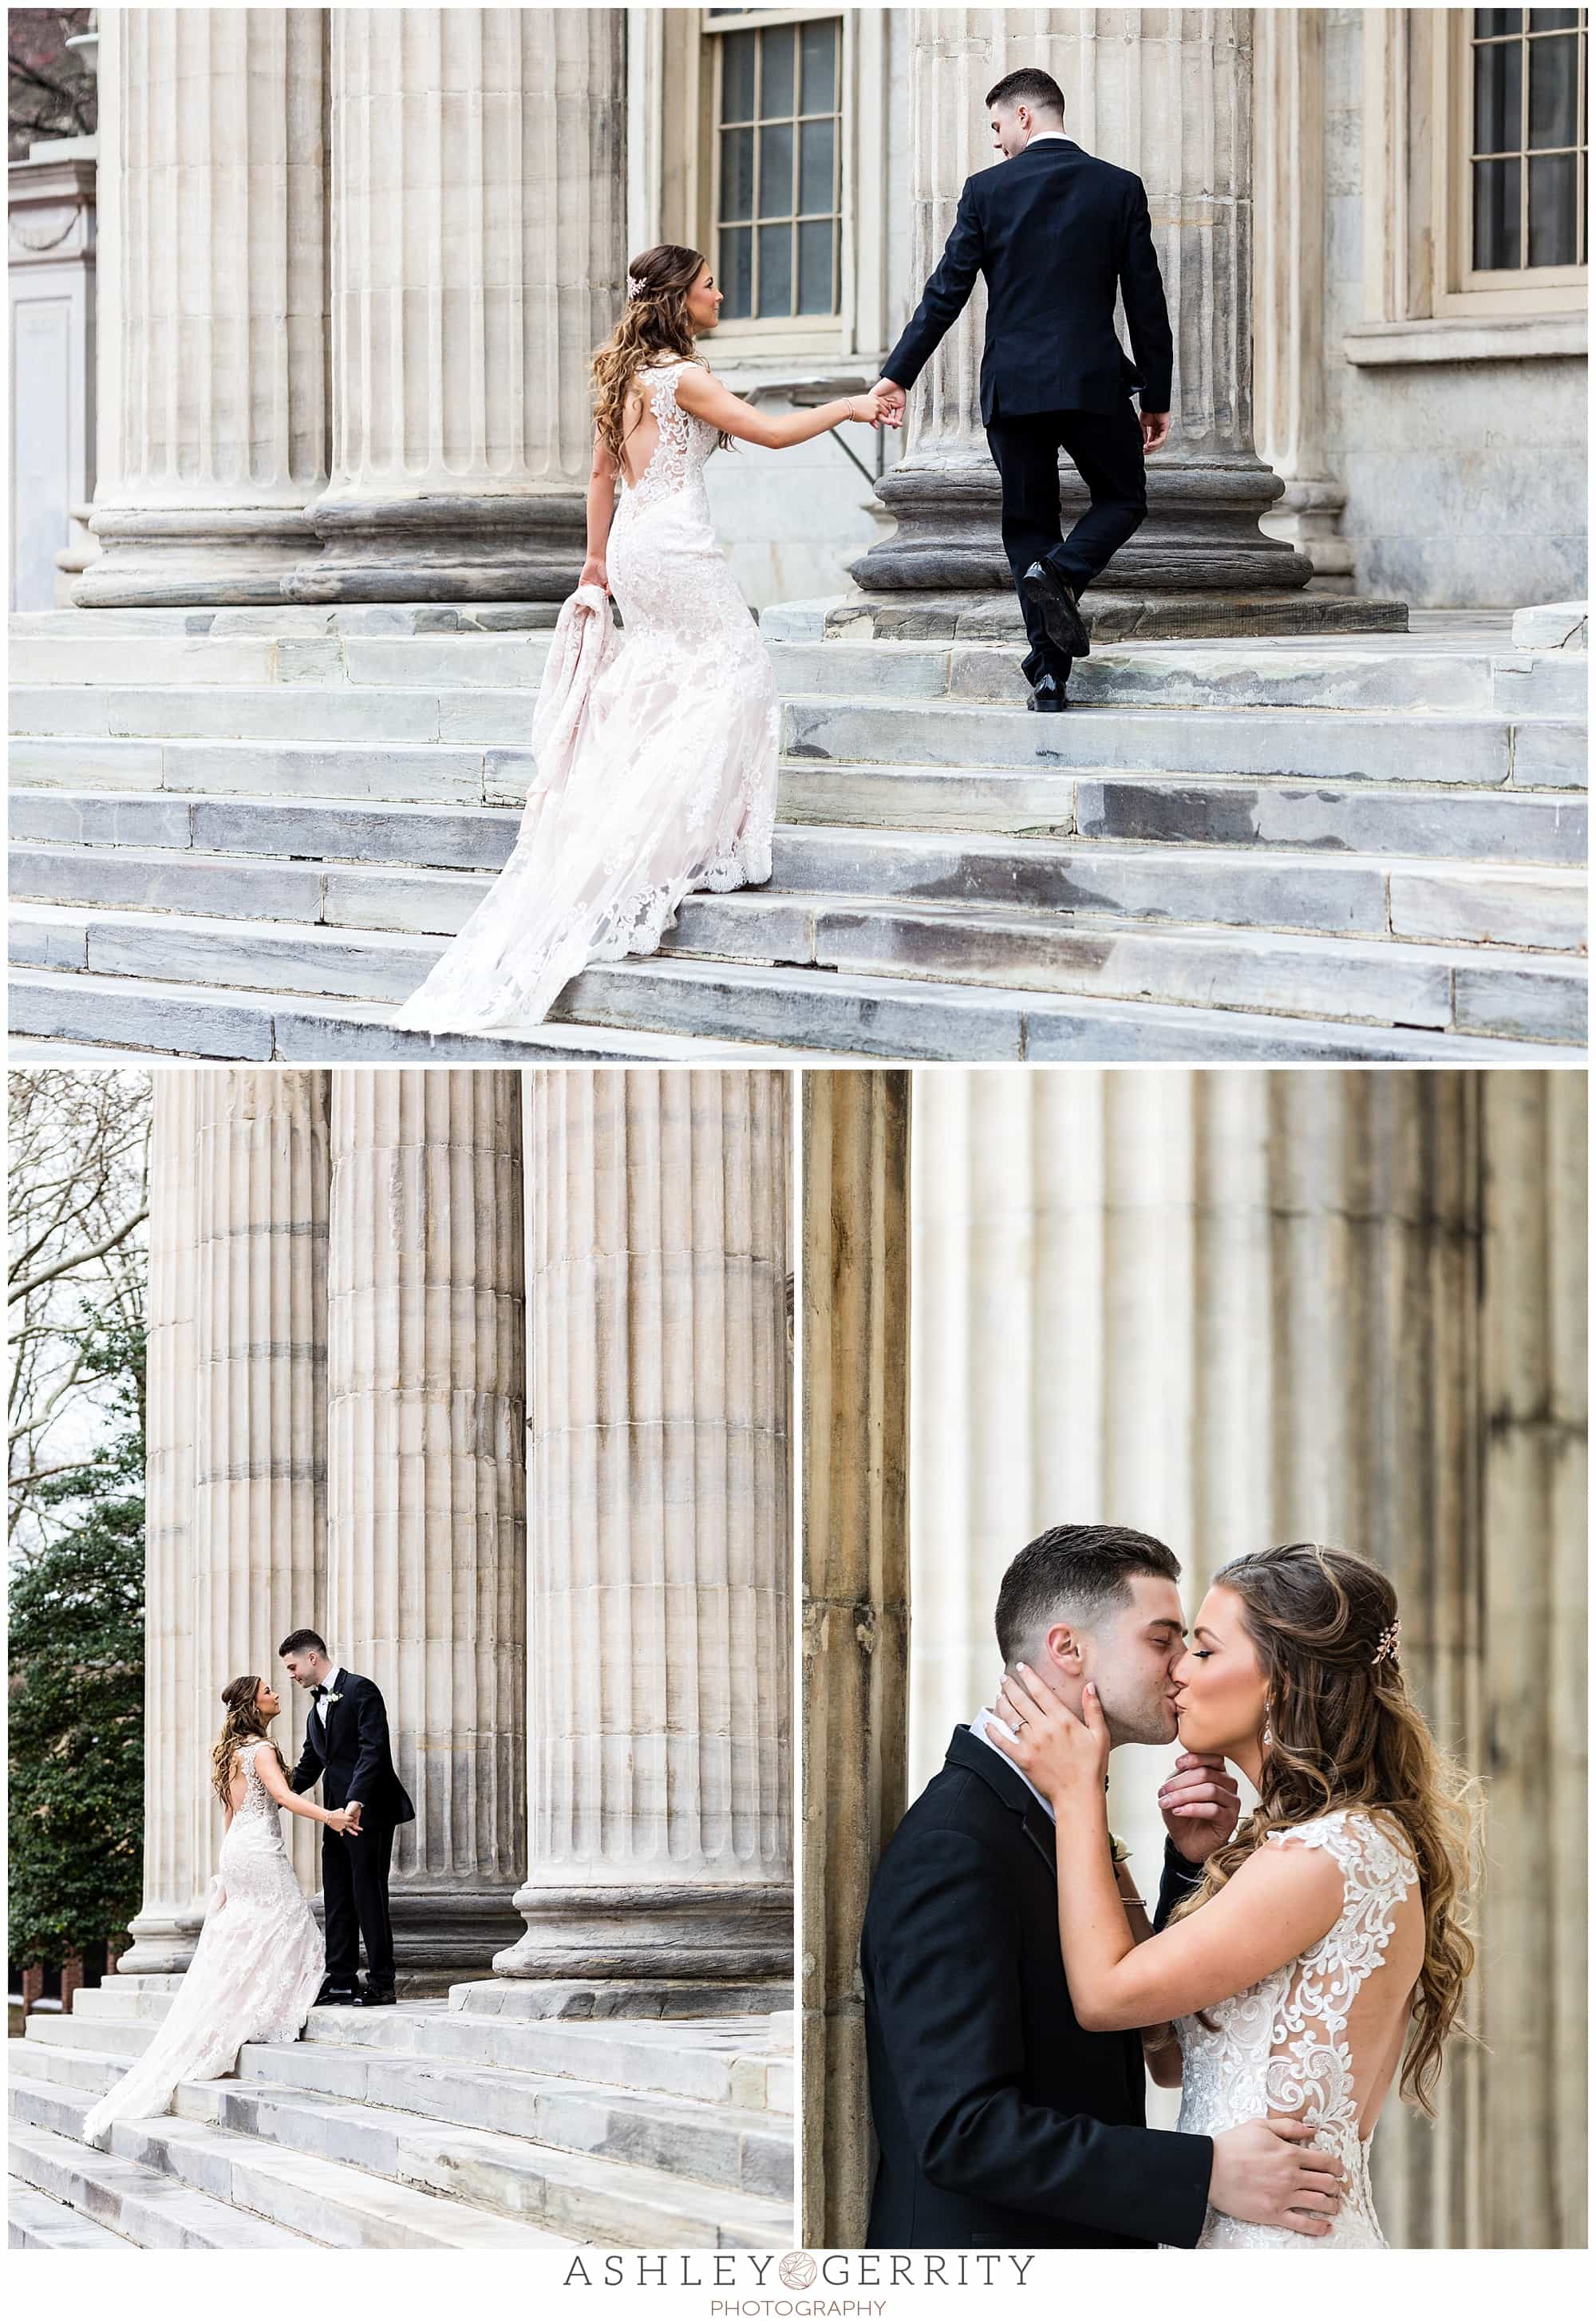 wedding portraits bride and groom kissing walking upstairs outside merchant exchange building front steps